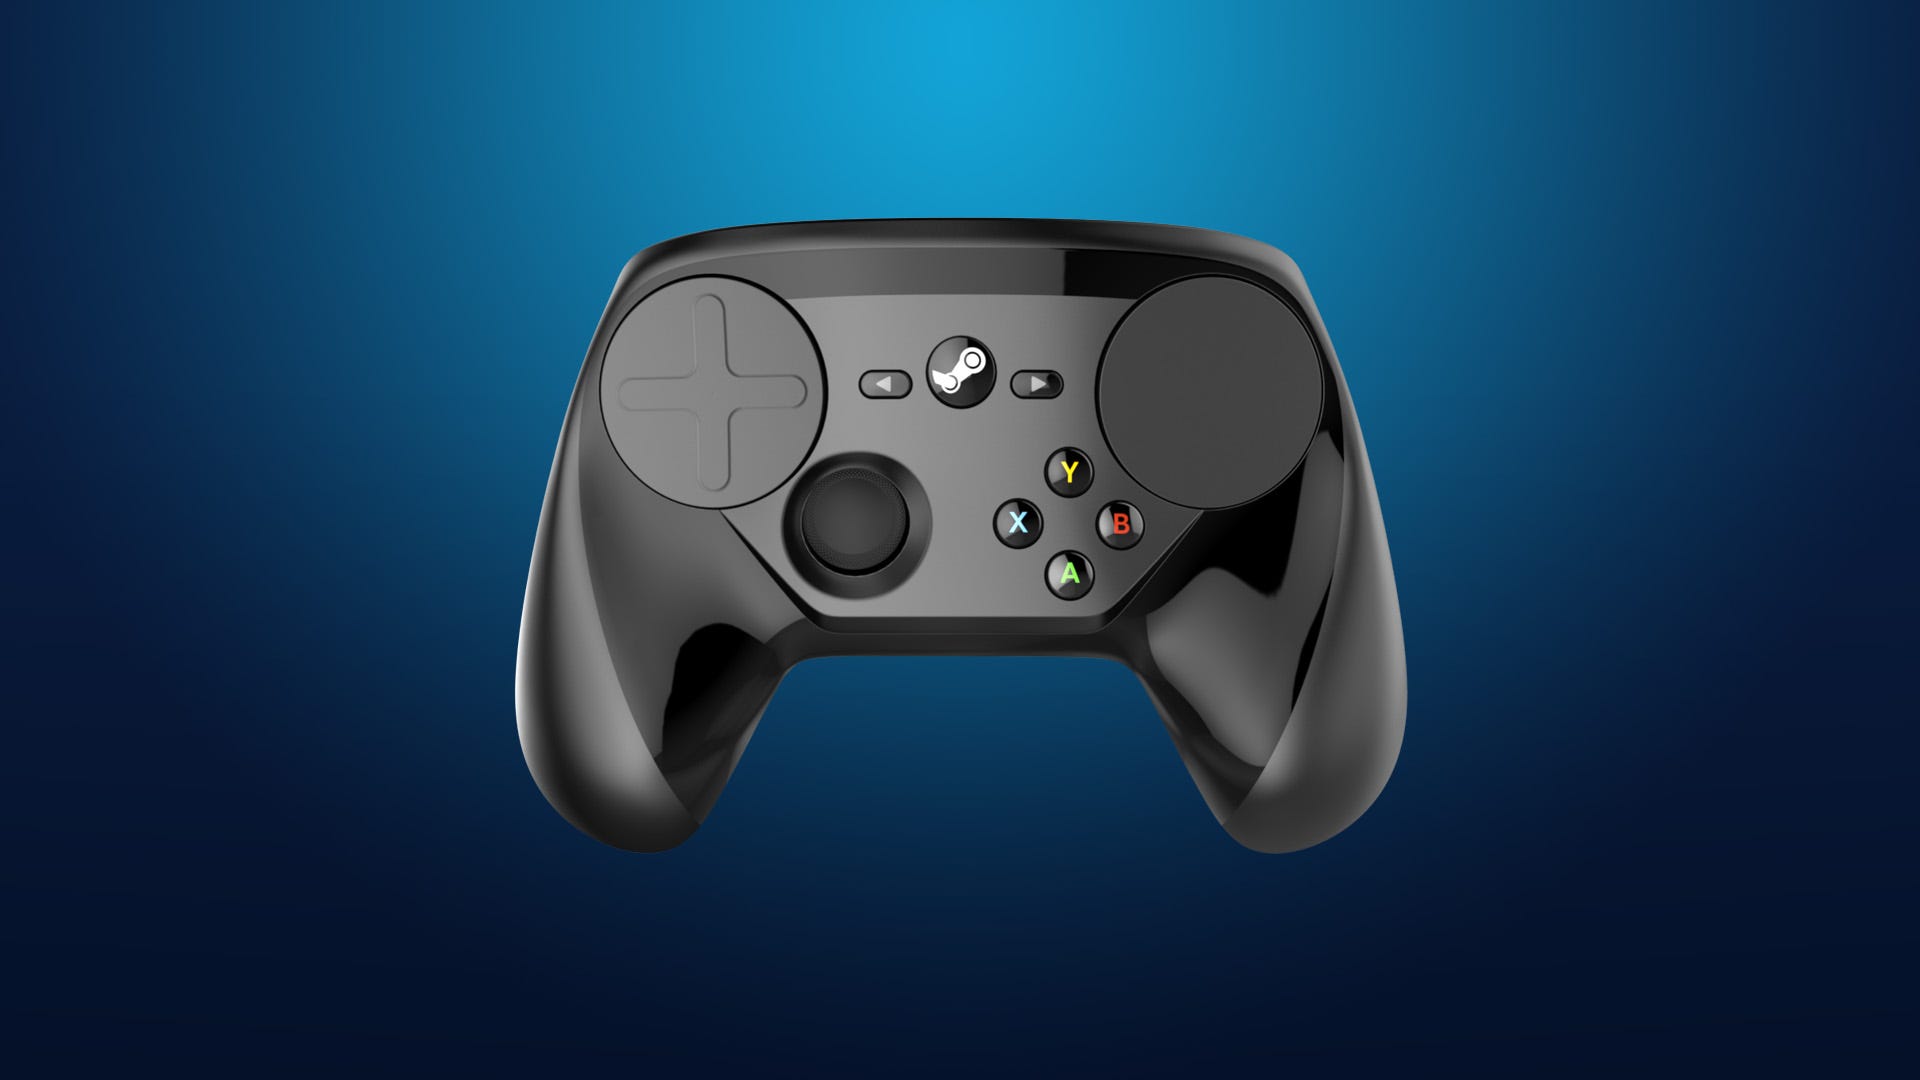 ps4 controller for steam